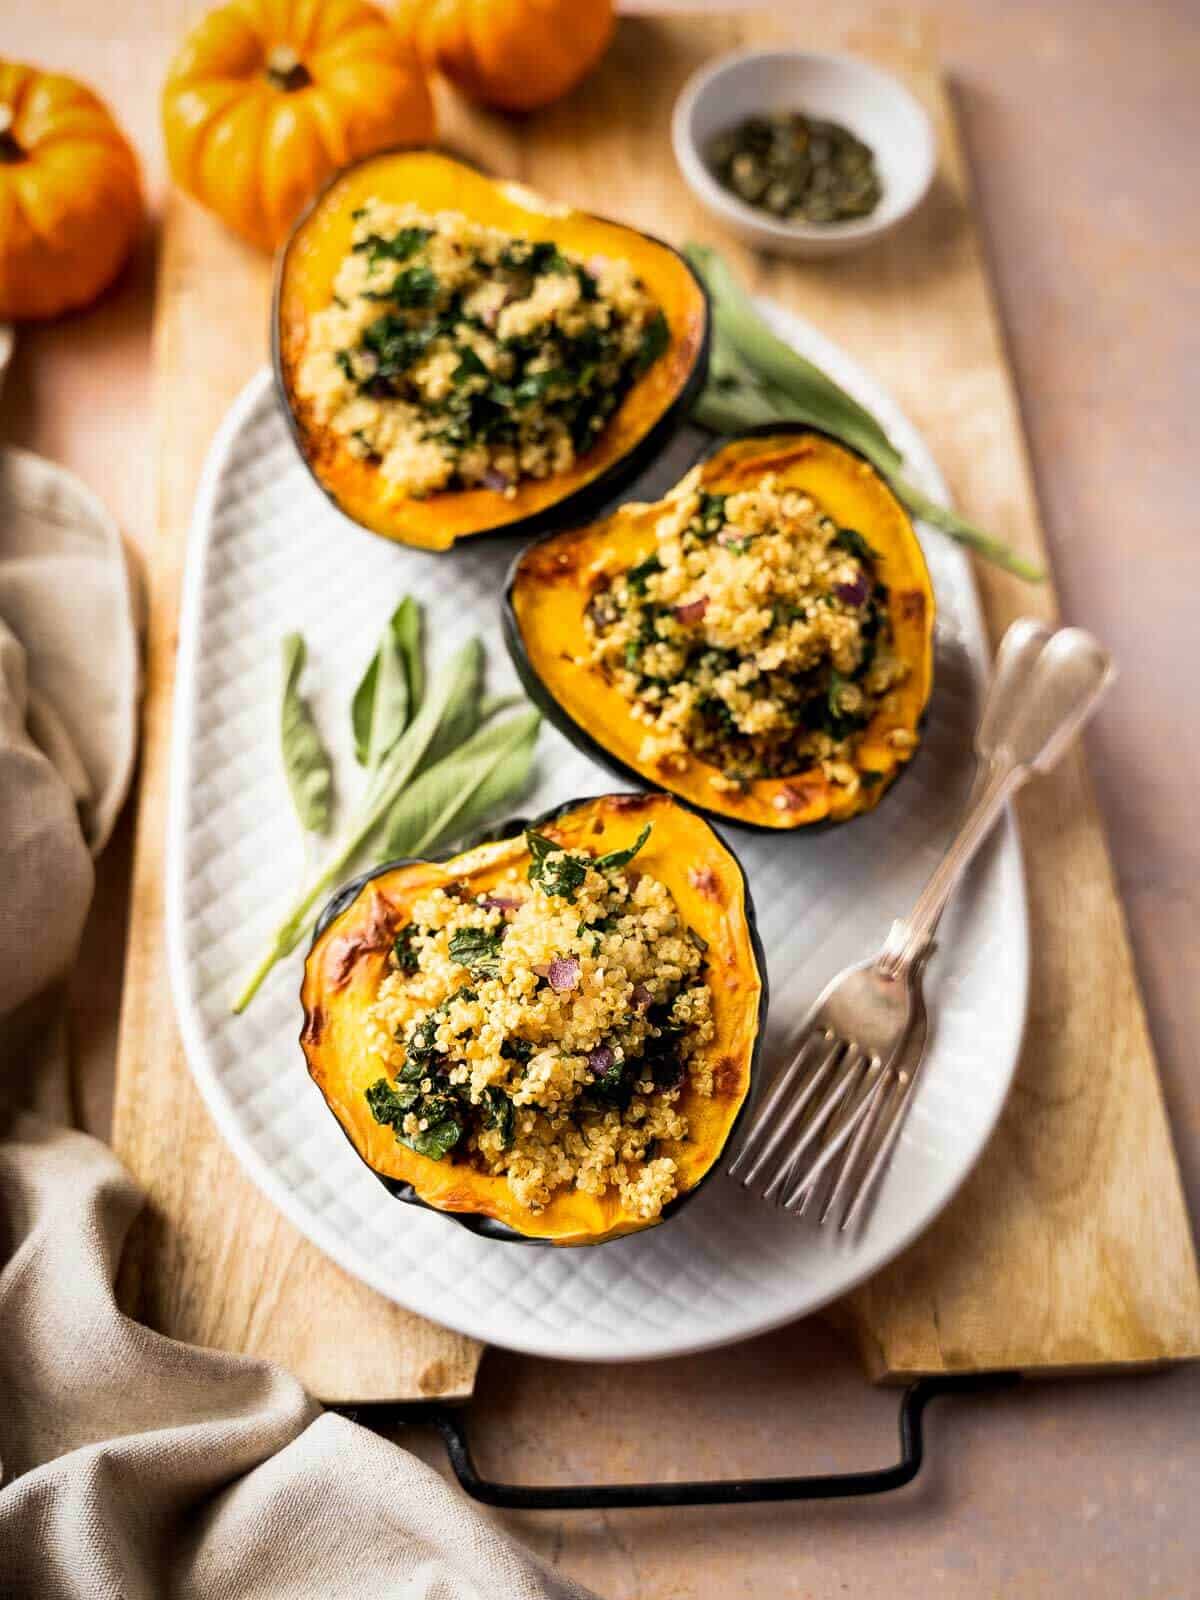 stuffed acorn squash served on a wooden table.